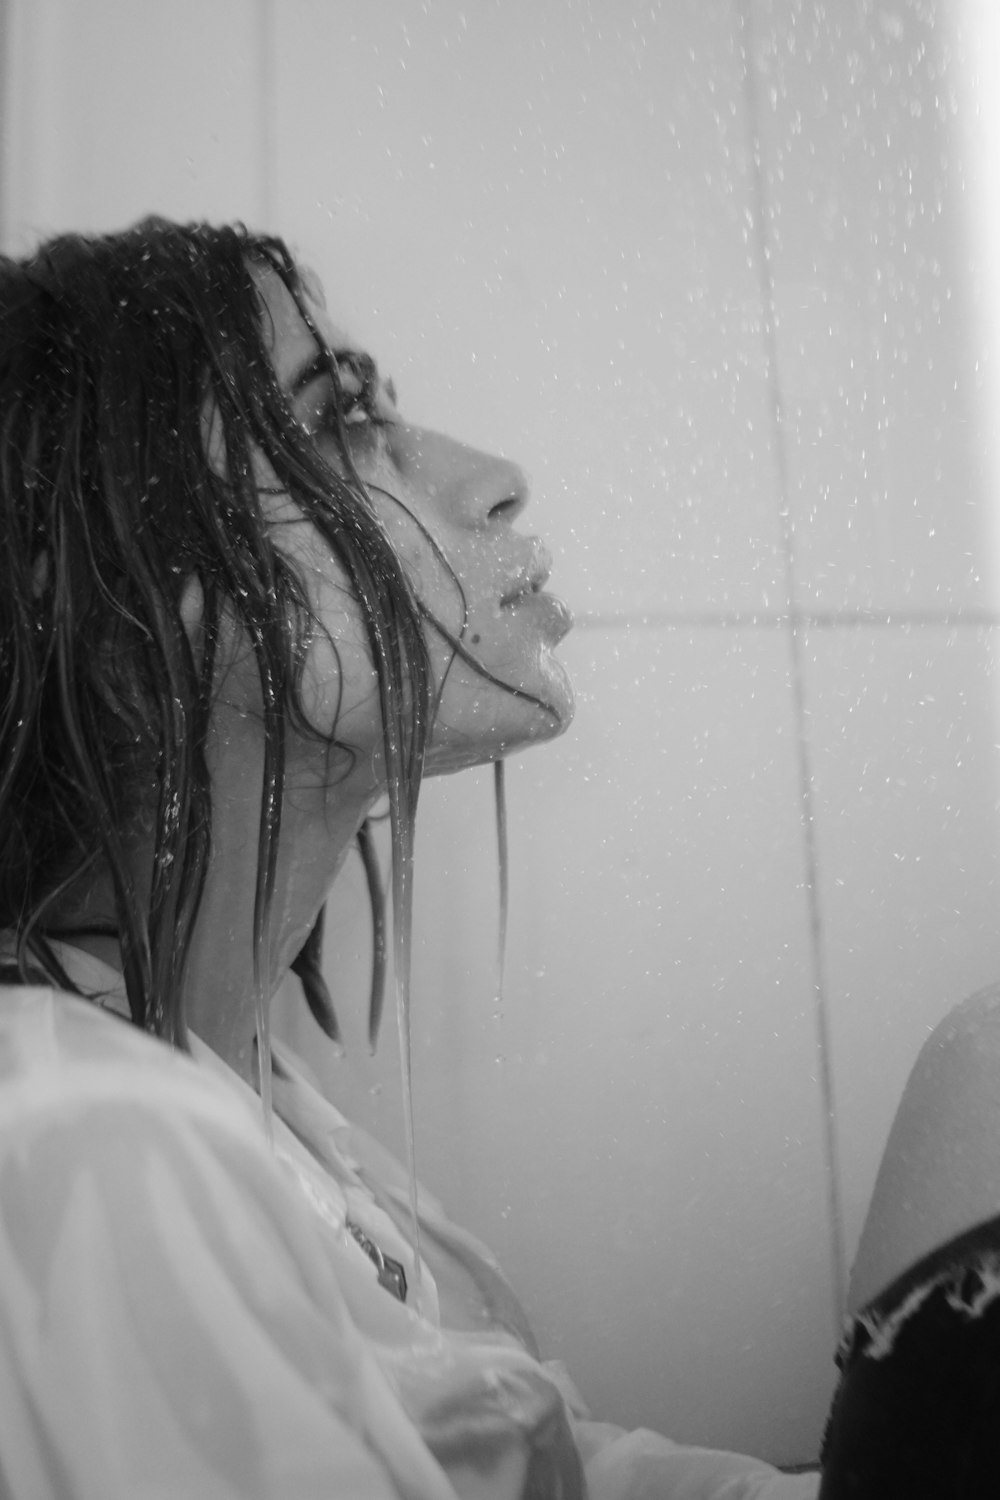 a woman with dreadlocks sitting in front of a shower